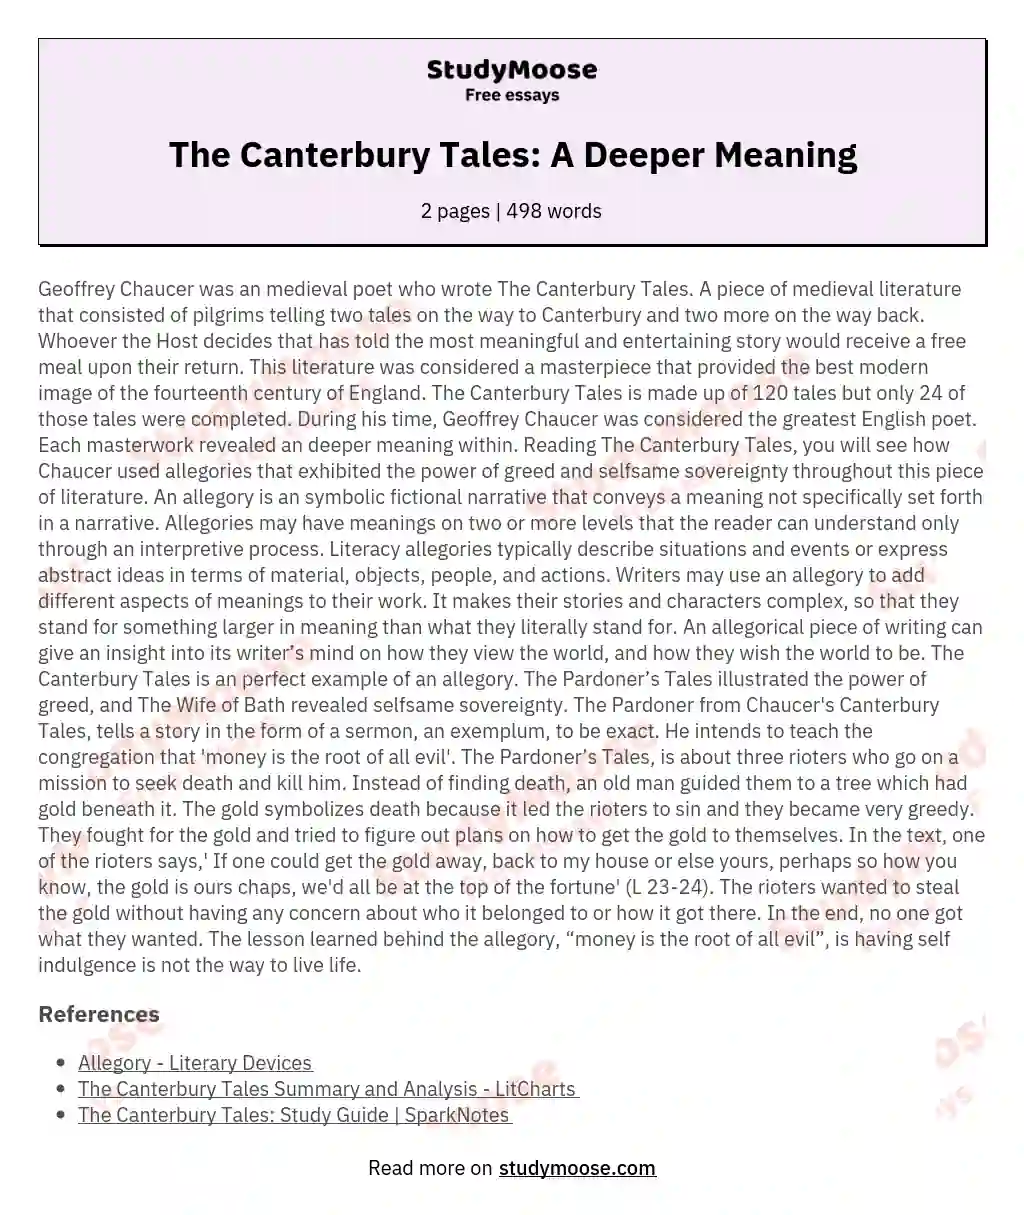 The Canterbury Tales: A Deeper Meaning